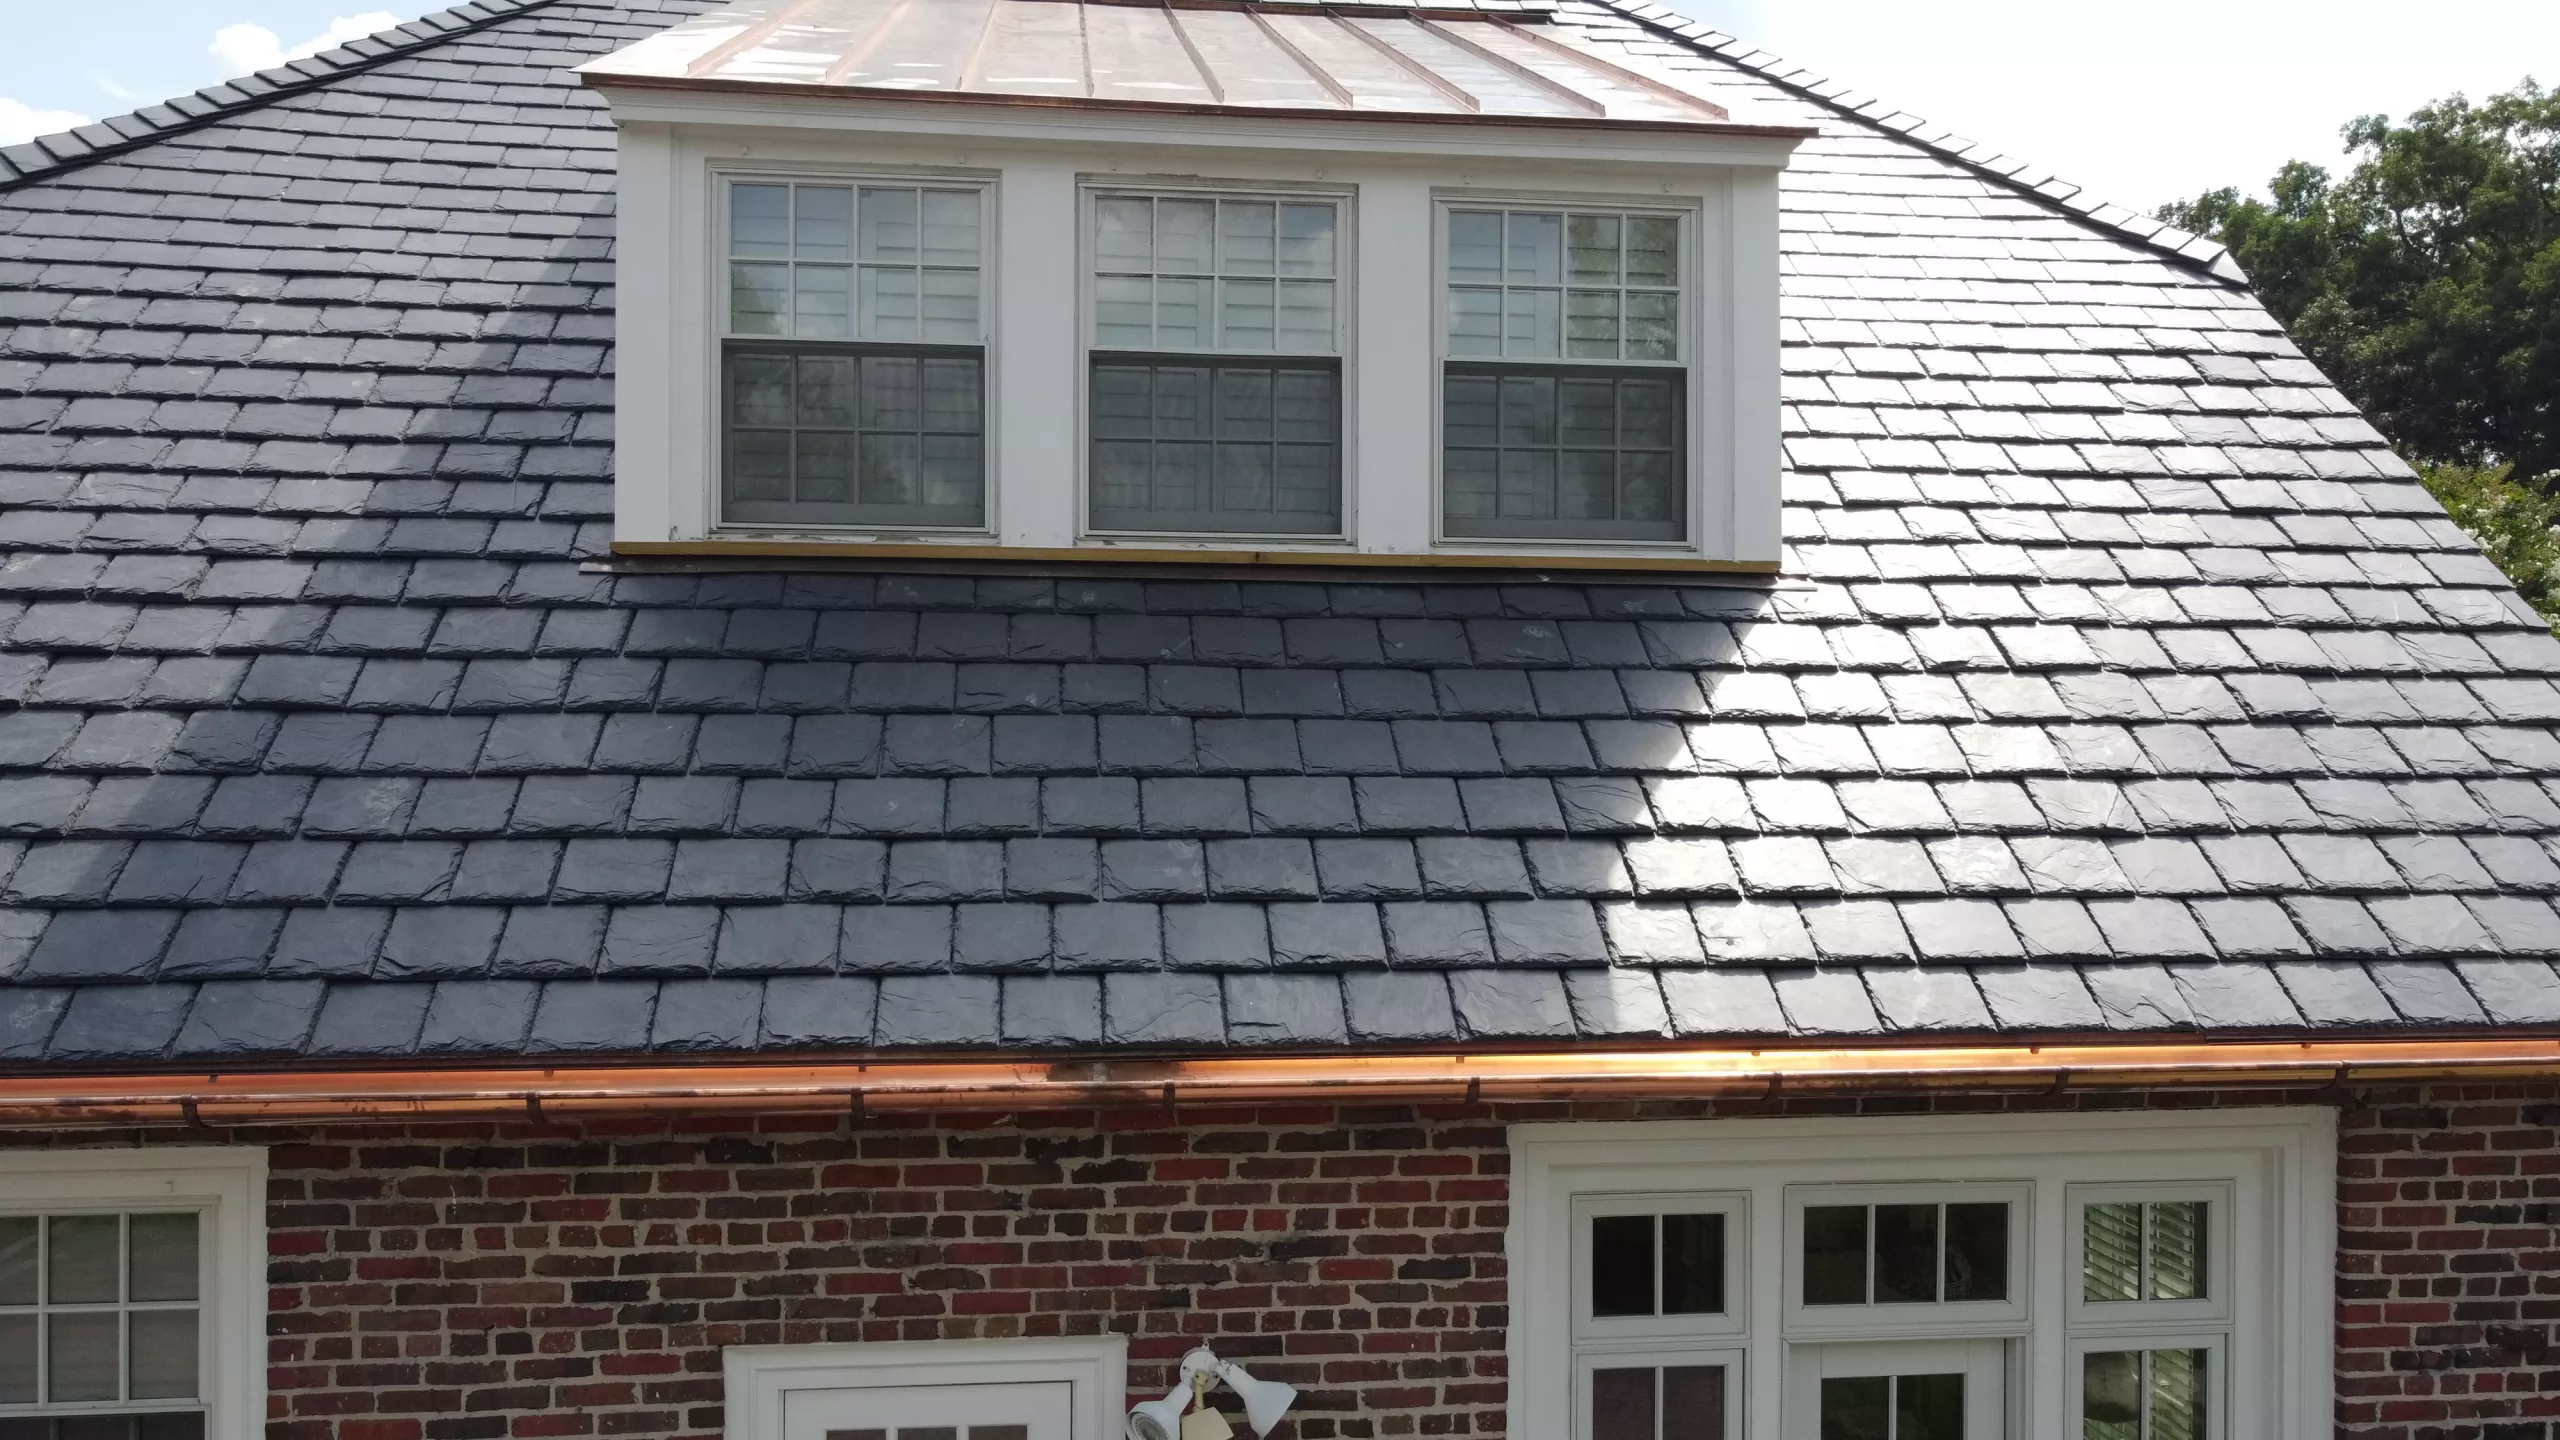 Slate Roof With Copper Trim